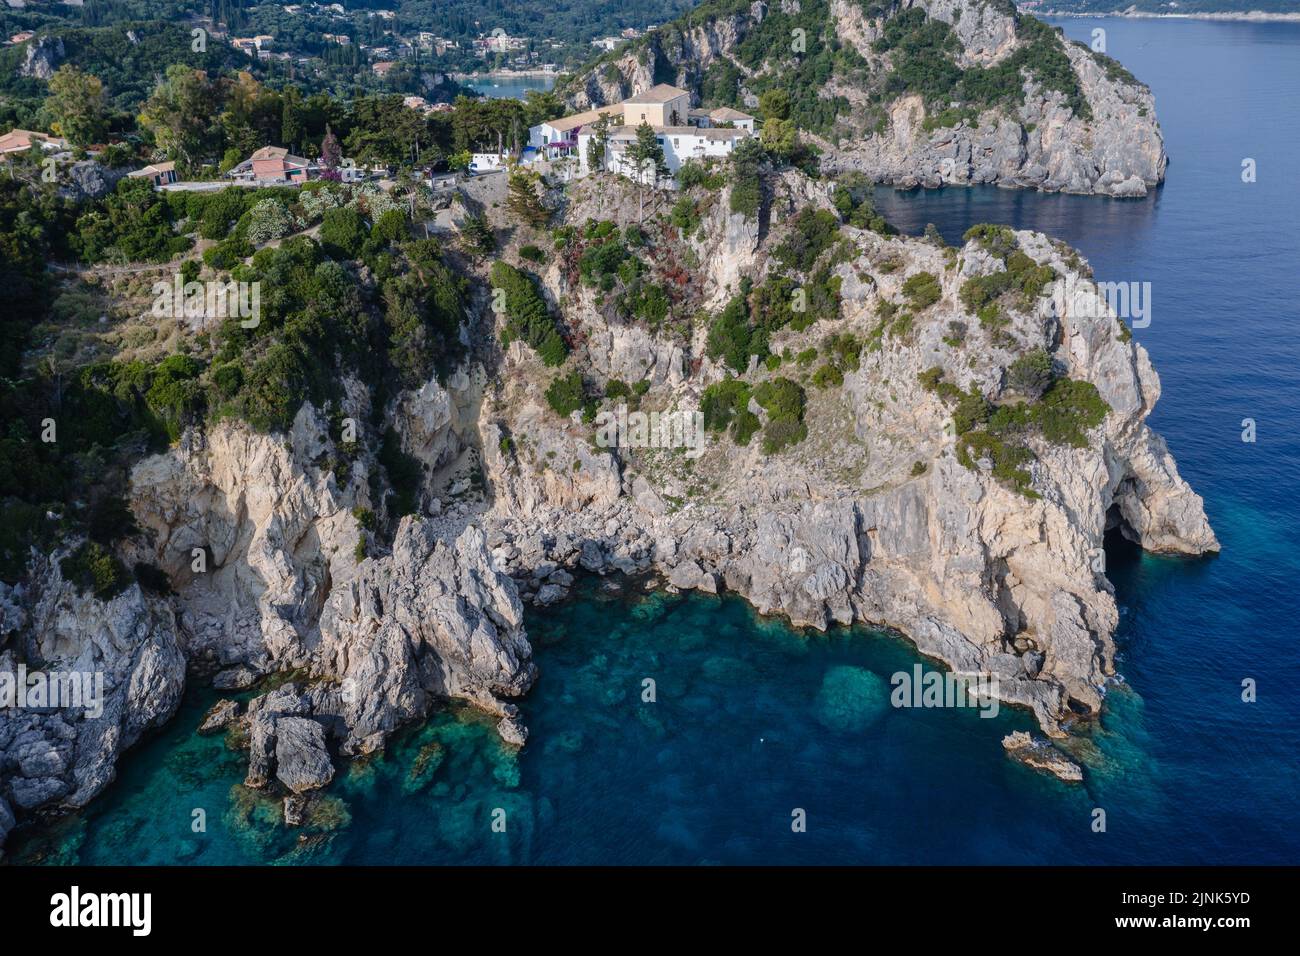 Aerial drone view with monastery in Palaiokastritsa famous resort town on Greek Island of Corfu Stock Photo